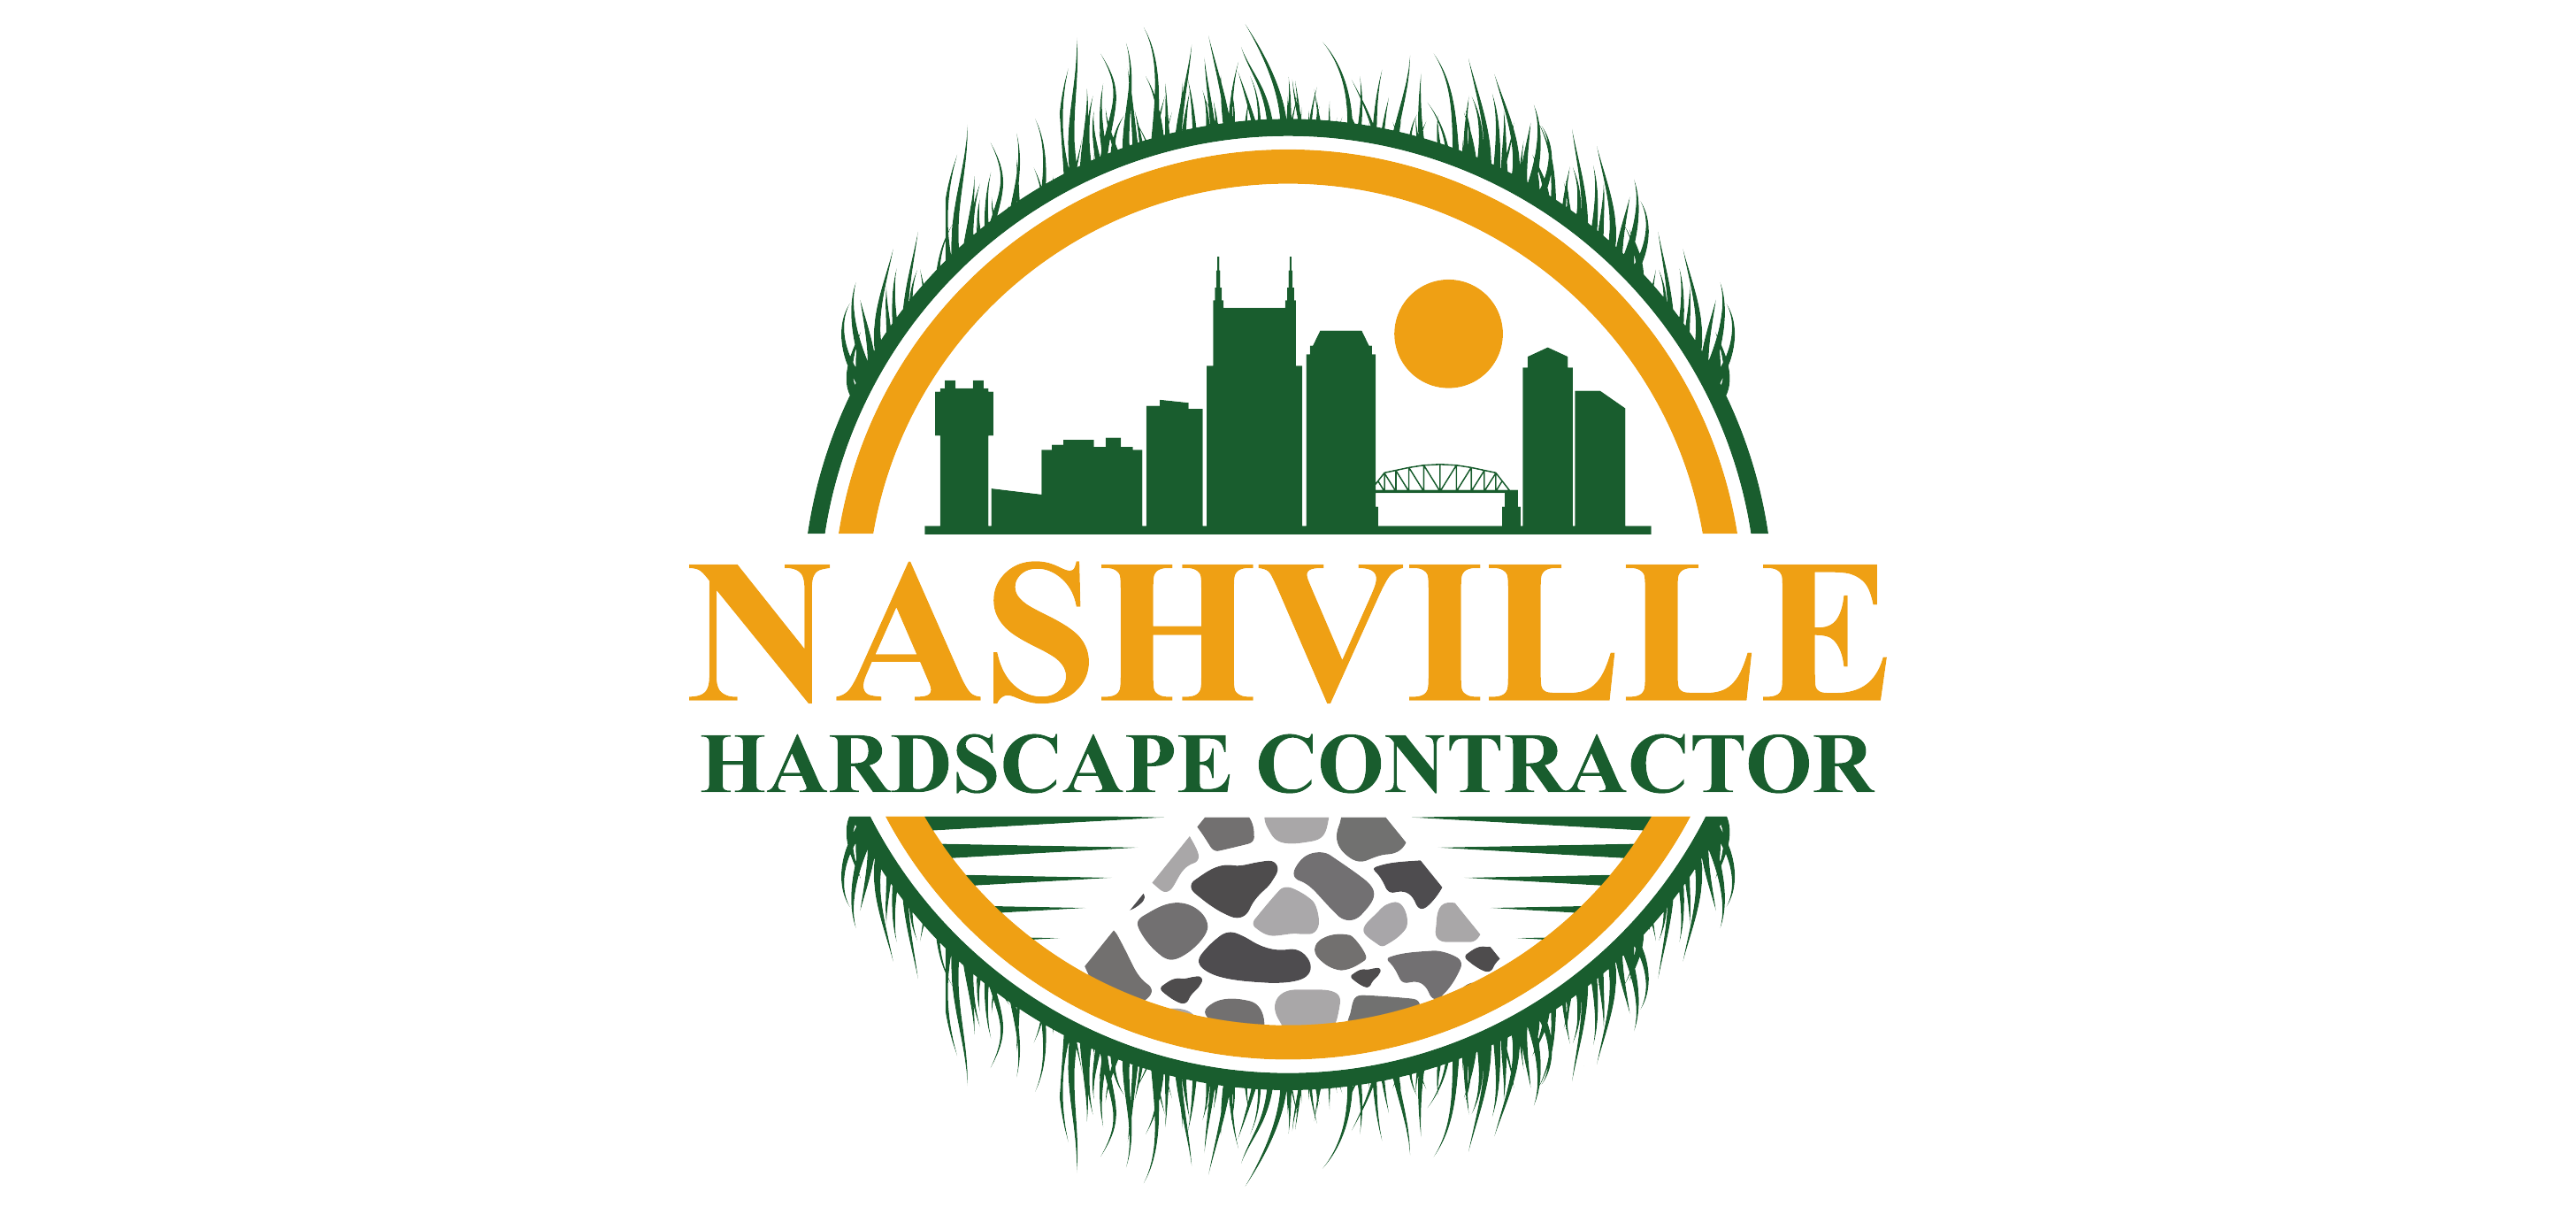 Nashville Hardscape Contractor Hardscaping Services in Middle Tennessee